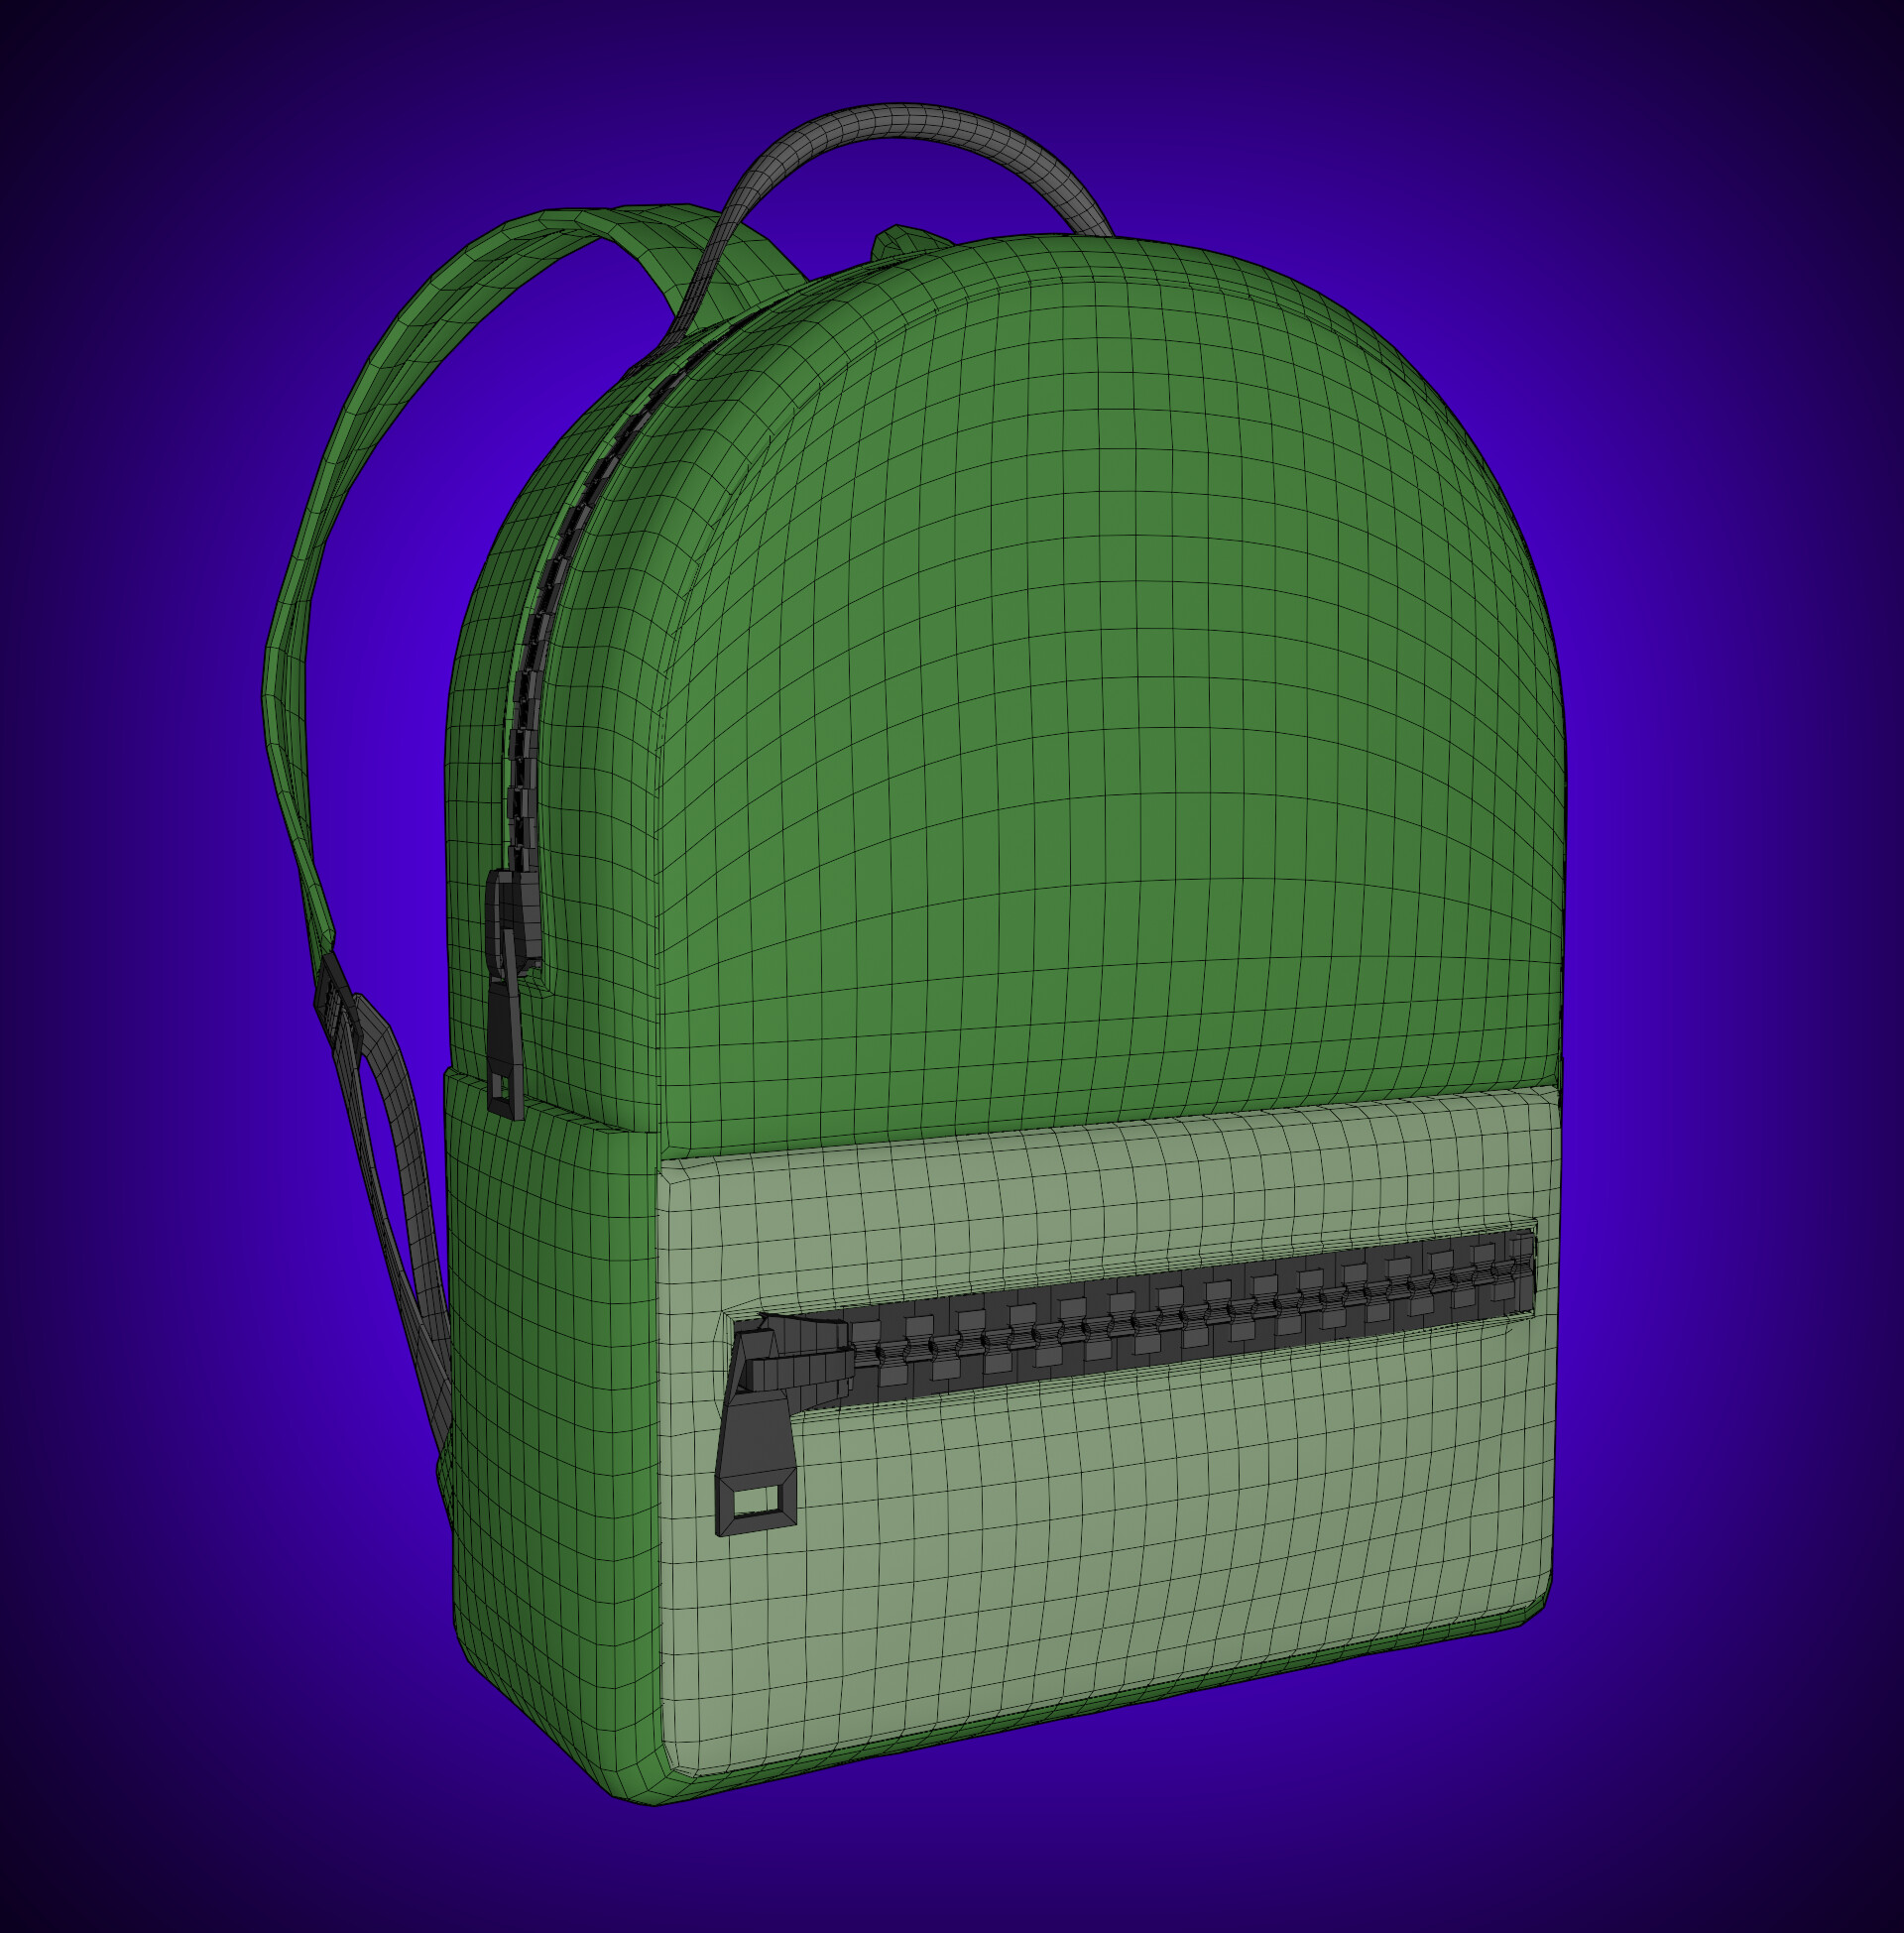 Backpack 3D Models for Free - Download Free 3D · Clara.io